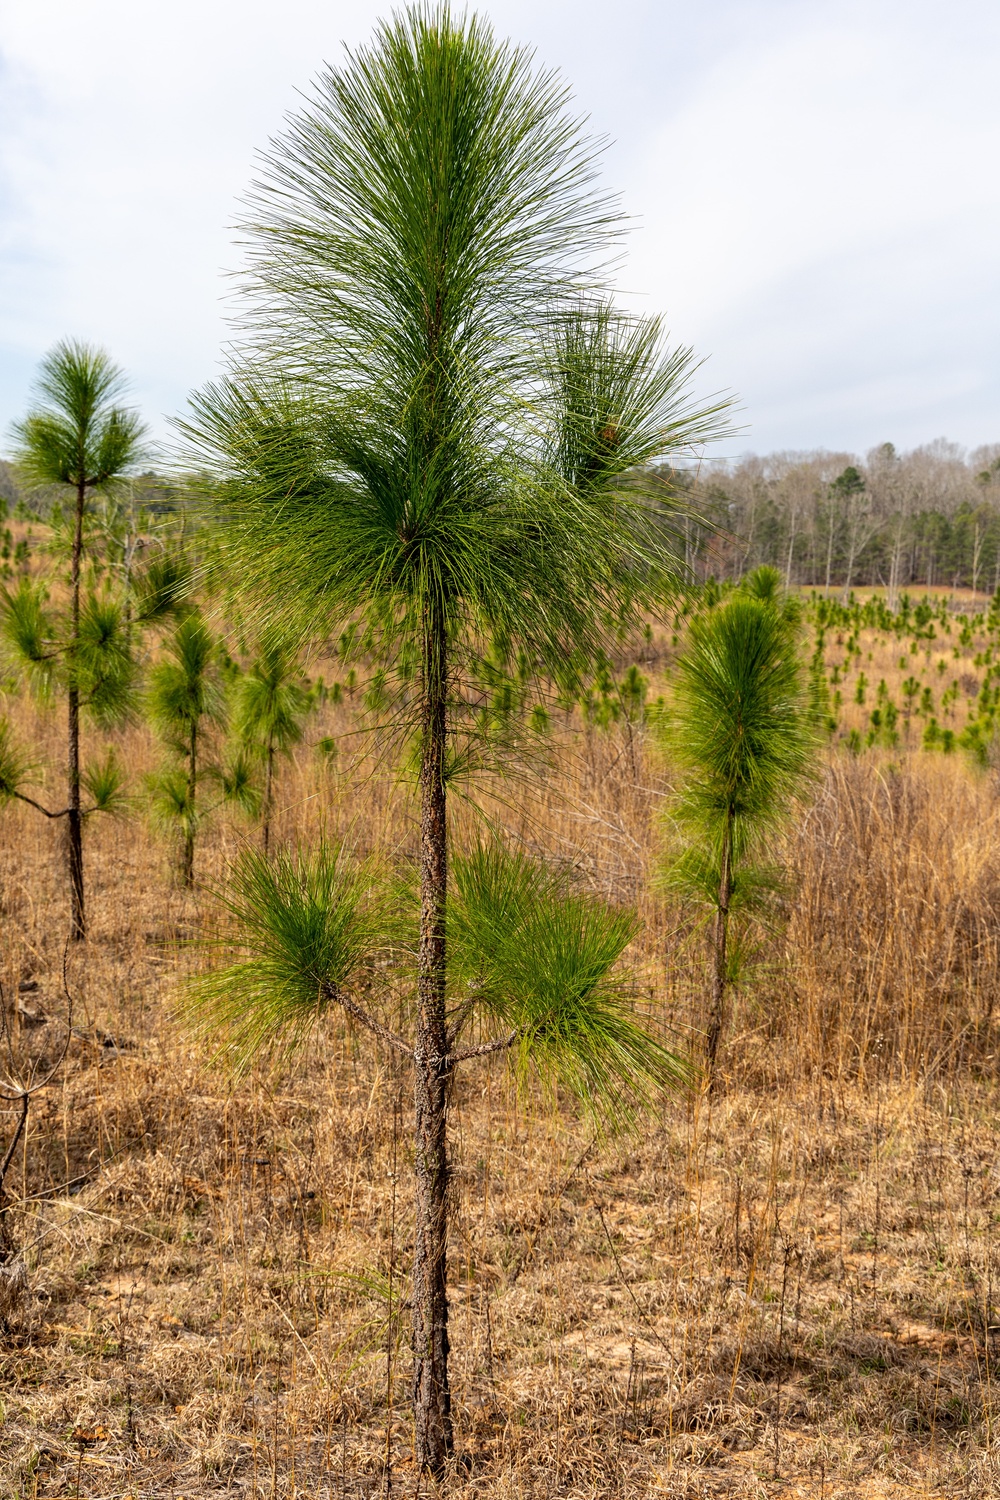 New Growth: Young Long Leaf Pine Stand Tall in Restoration Area